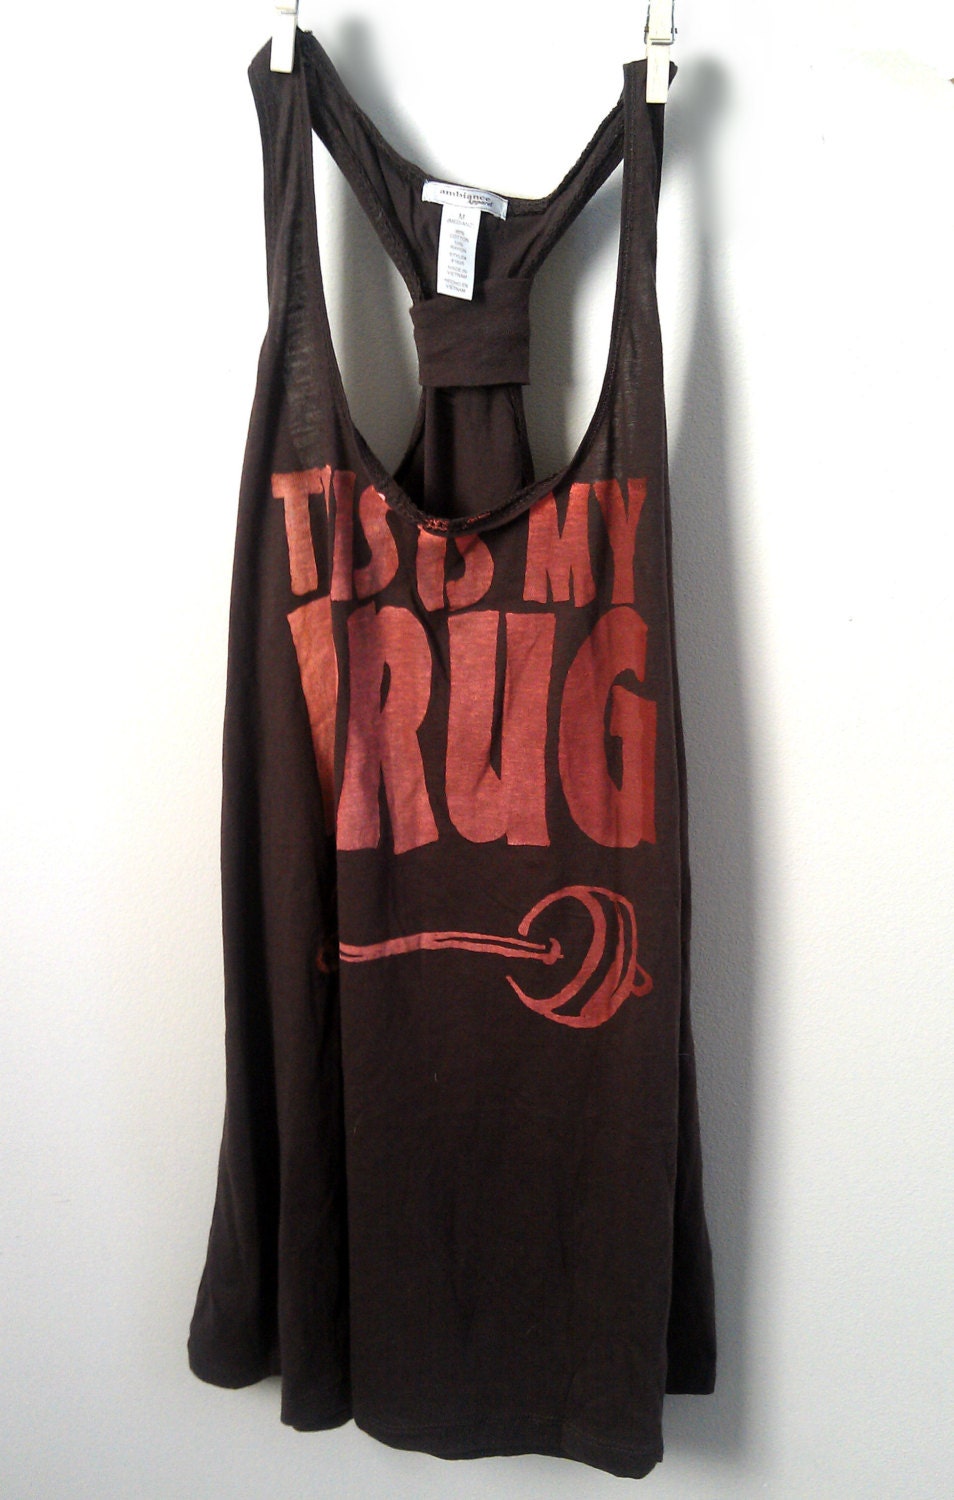 Medium Brown "This is my drug" Racerback Fitness / Workout Tank Top